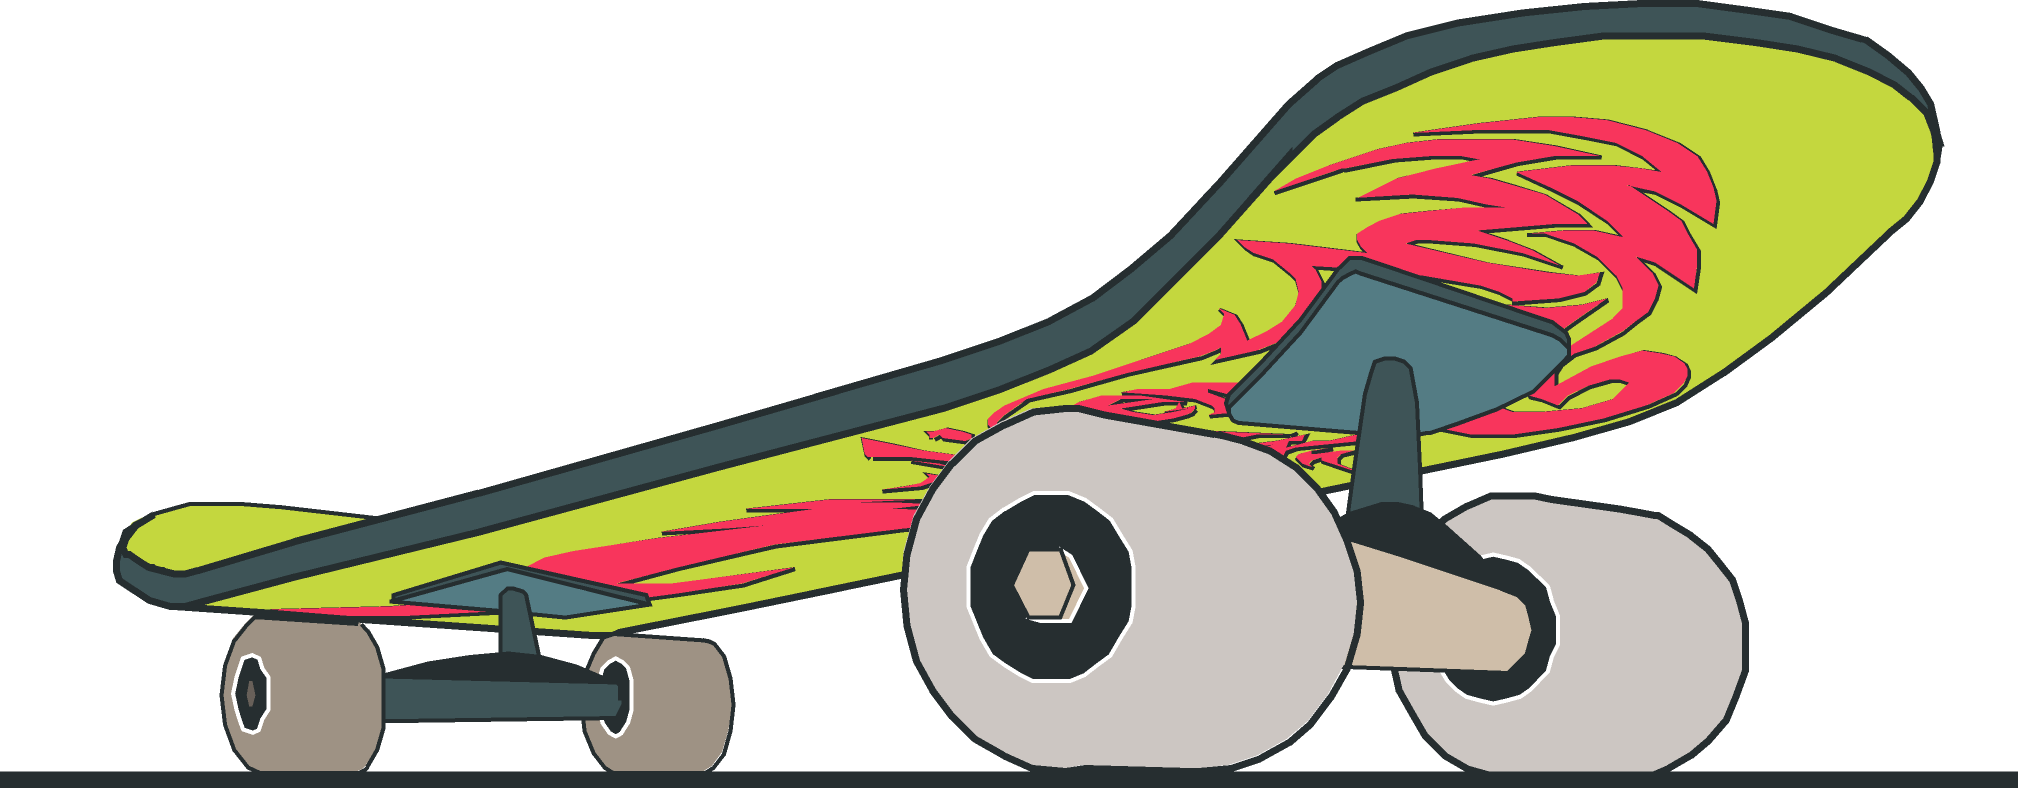 Skateboard Image Free Download Png Clipart